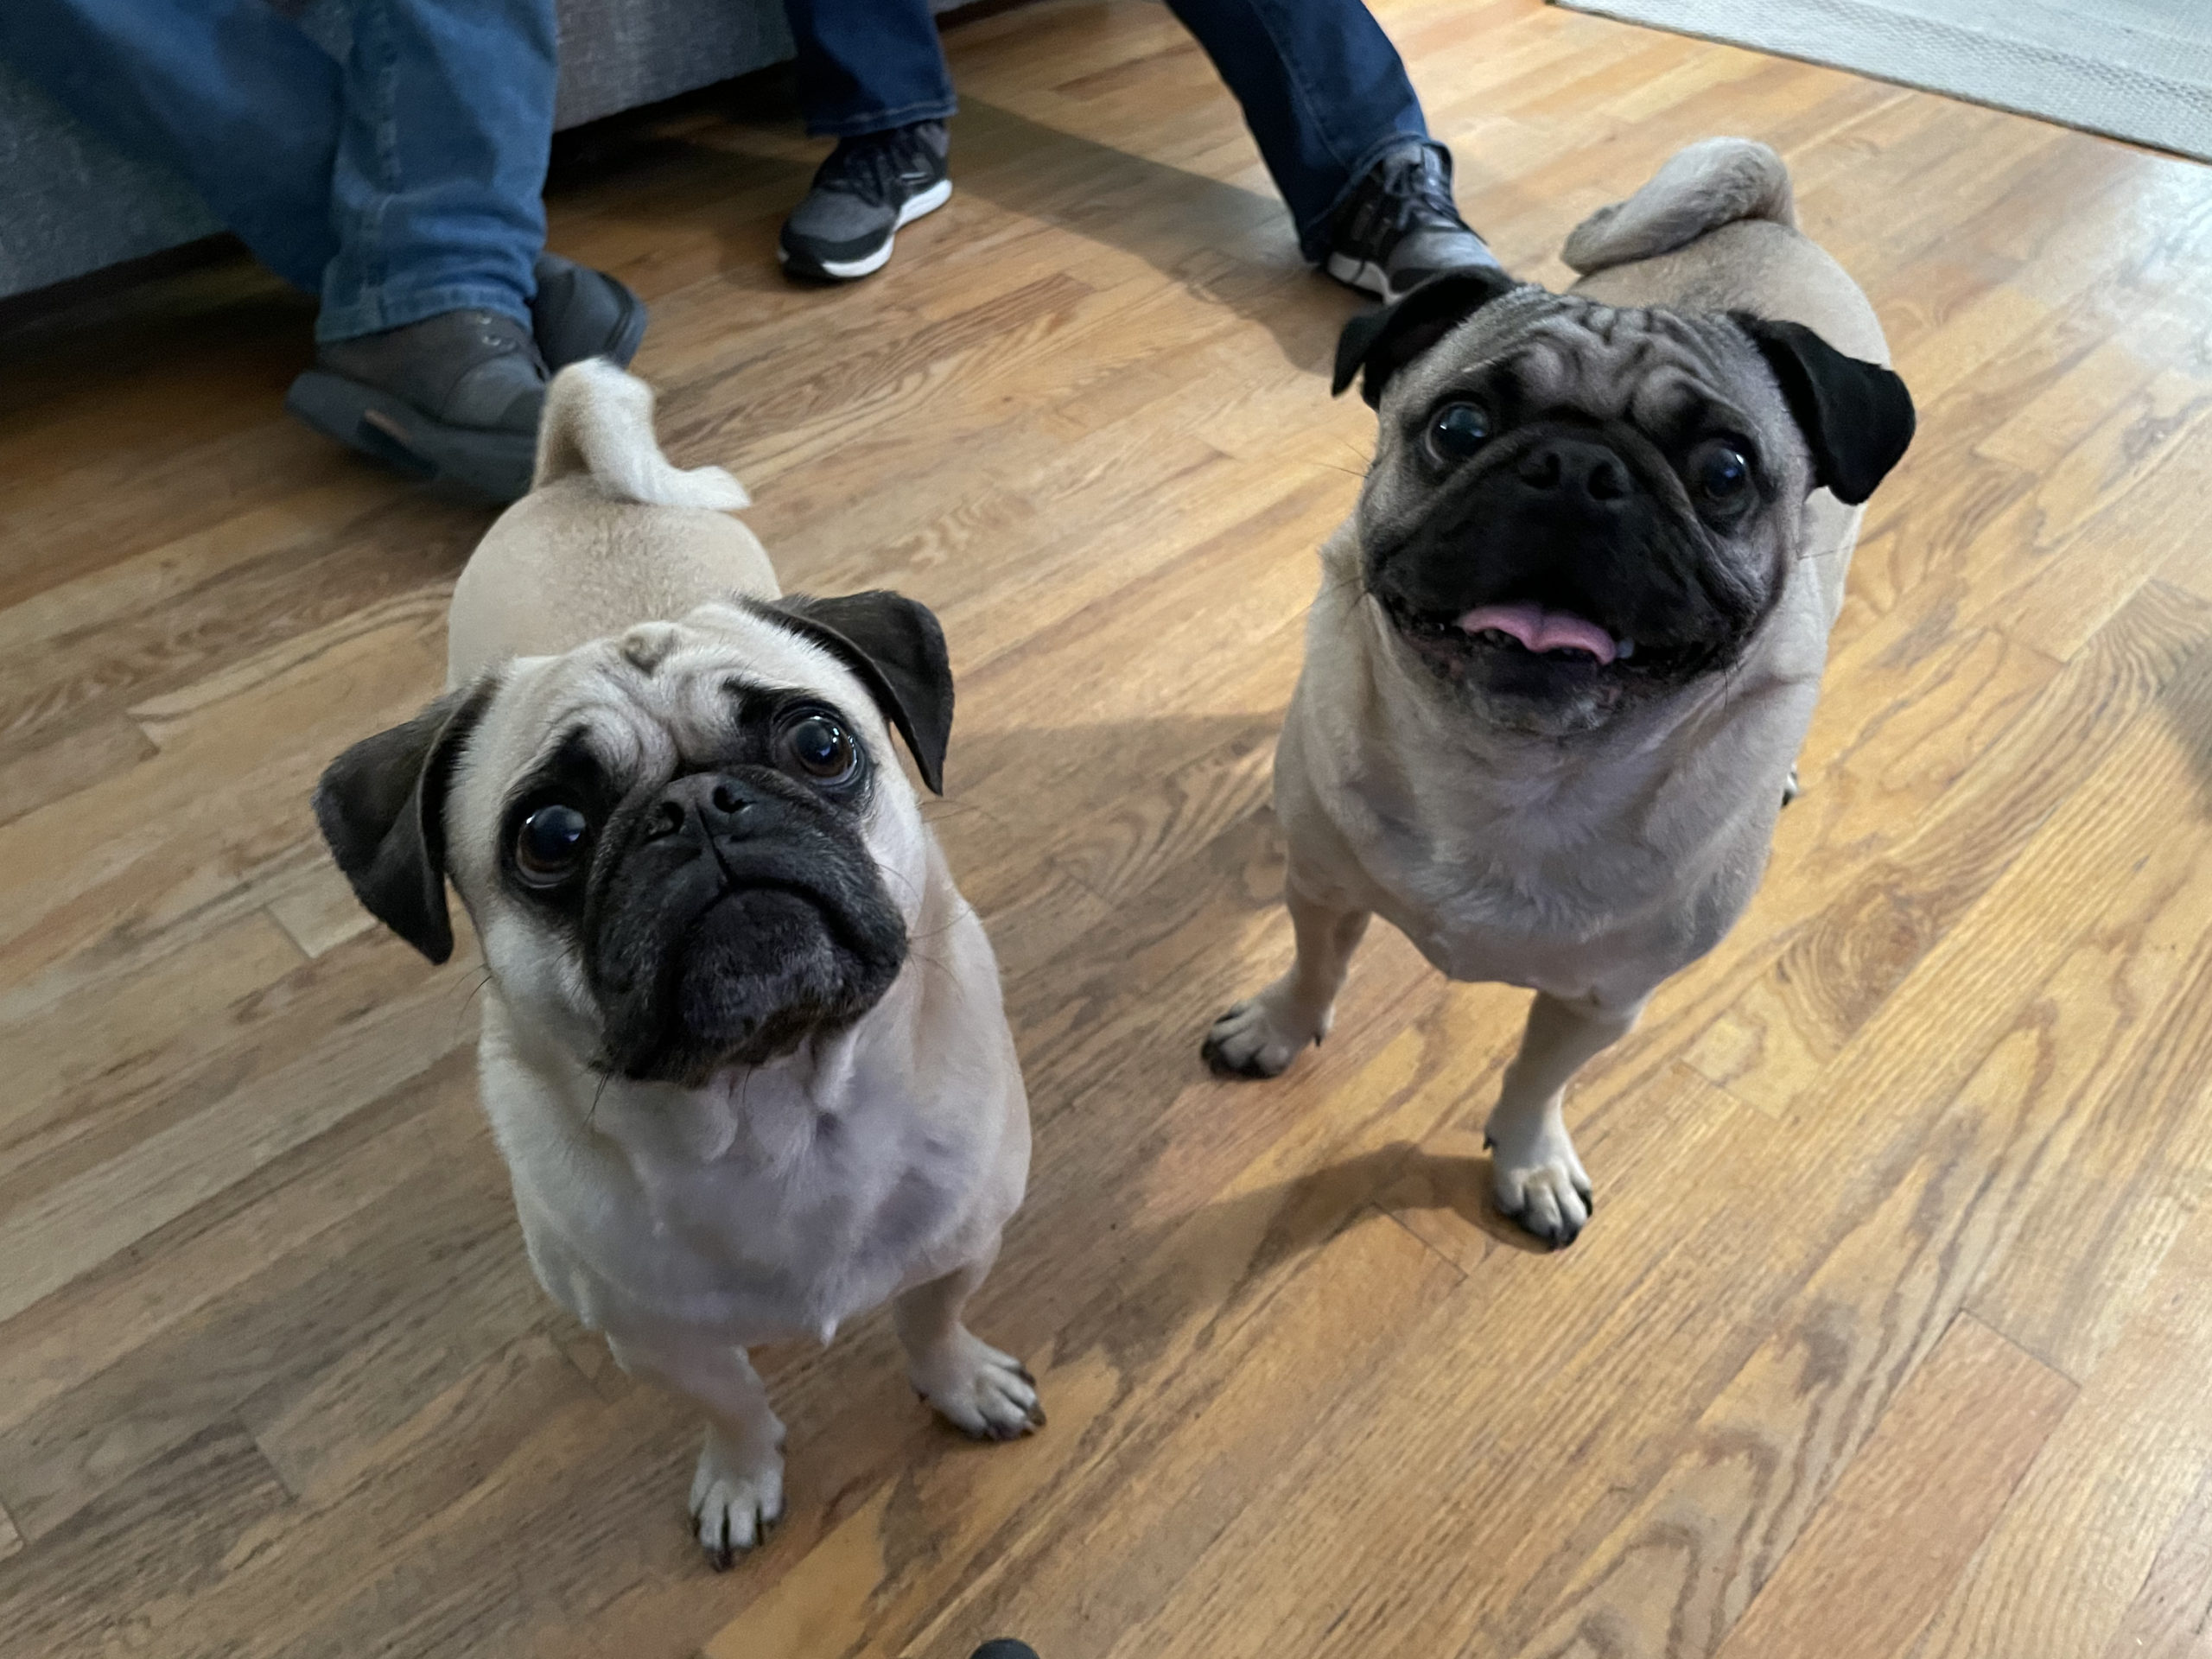 Jerry and Morty scaled - Helping a Pair of Pugs Get Ready to Welcome a New Baby into their Home